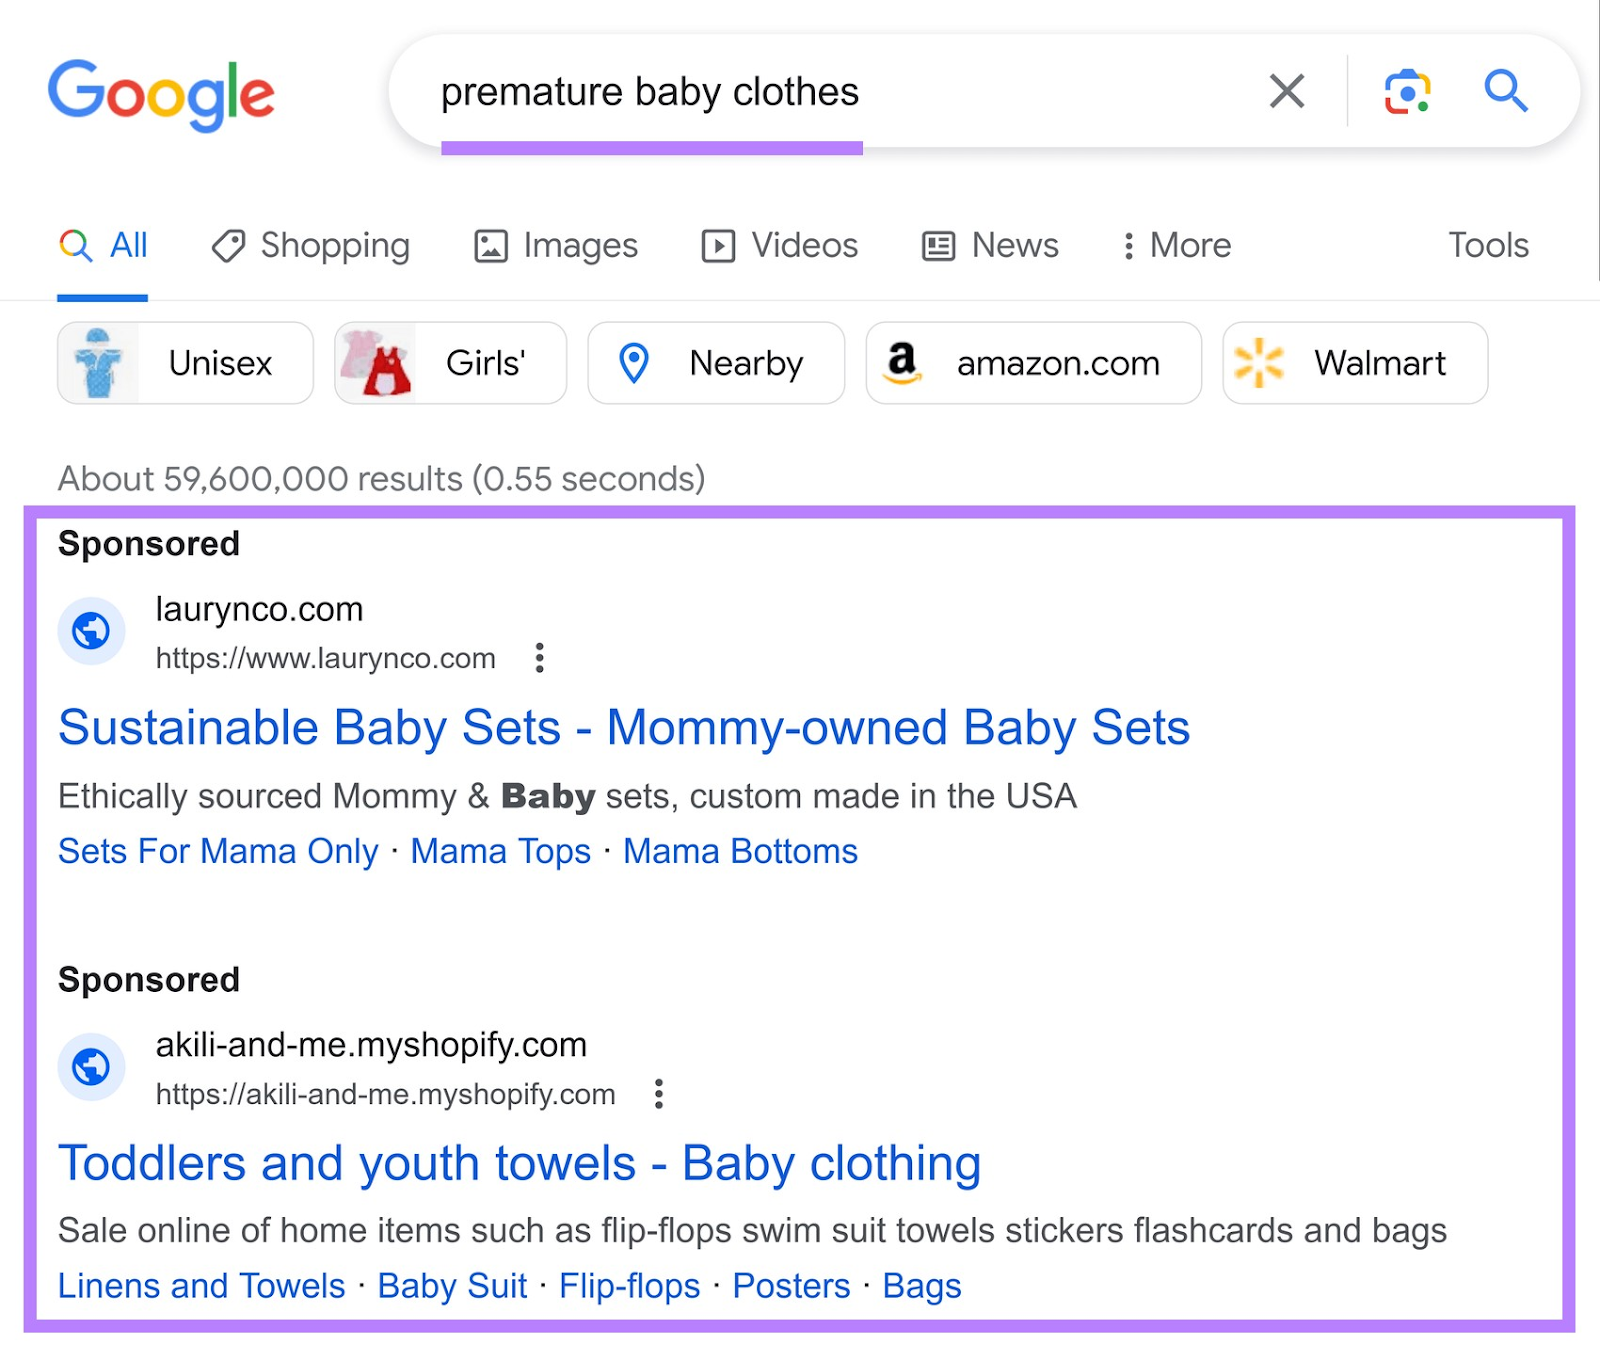 an example of Google search results for “premature baby clothes” s،wing sponsored results